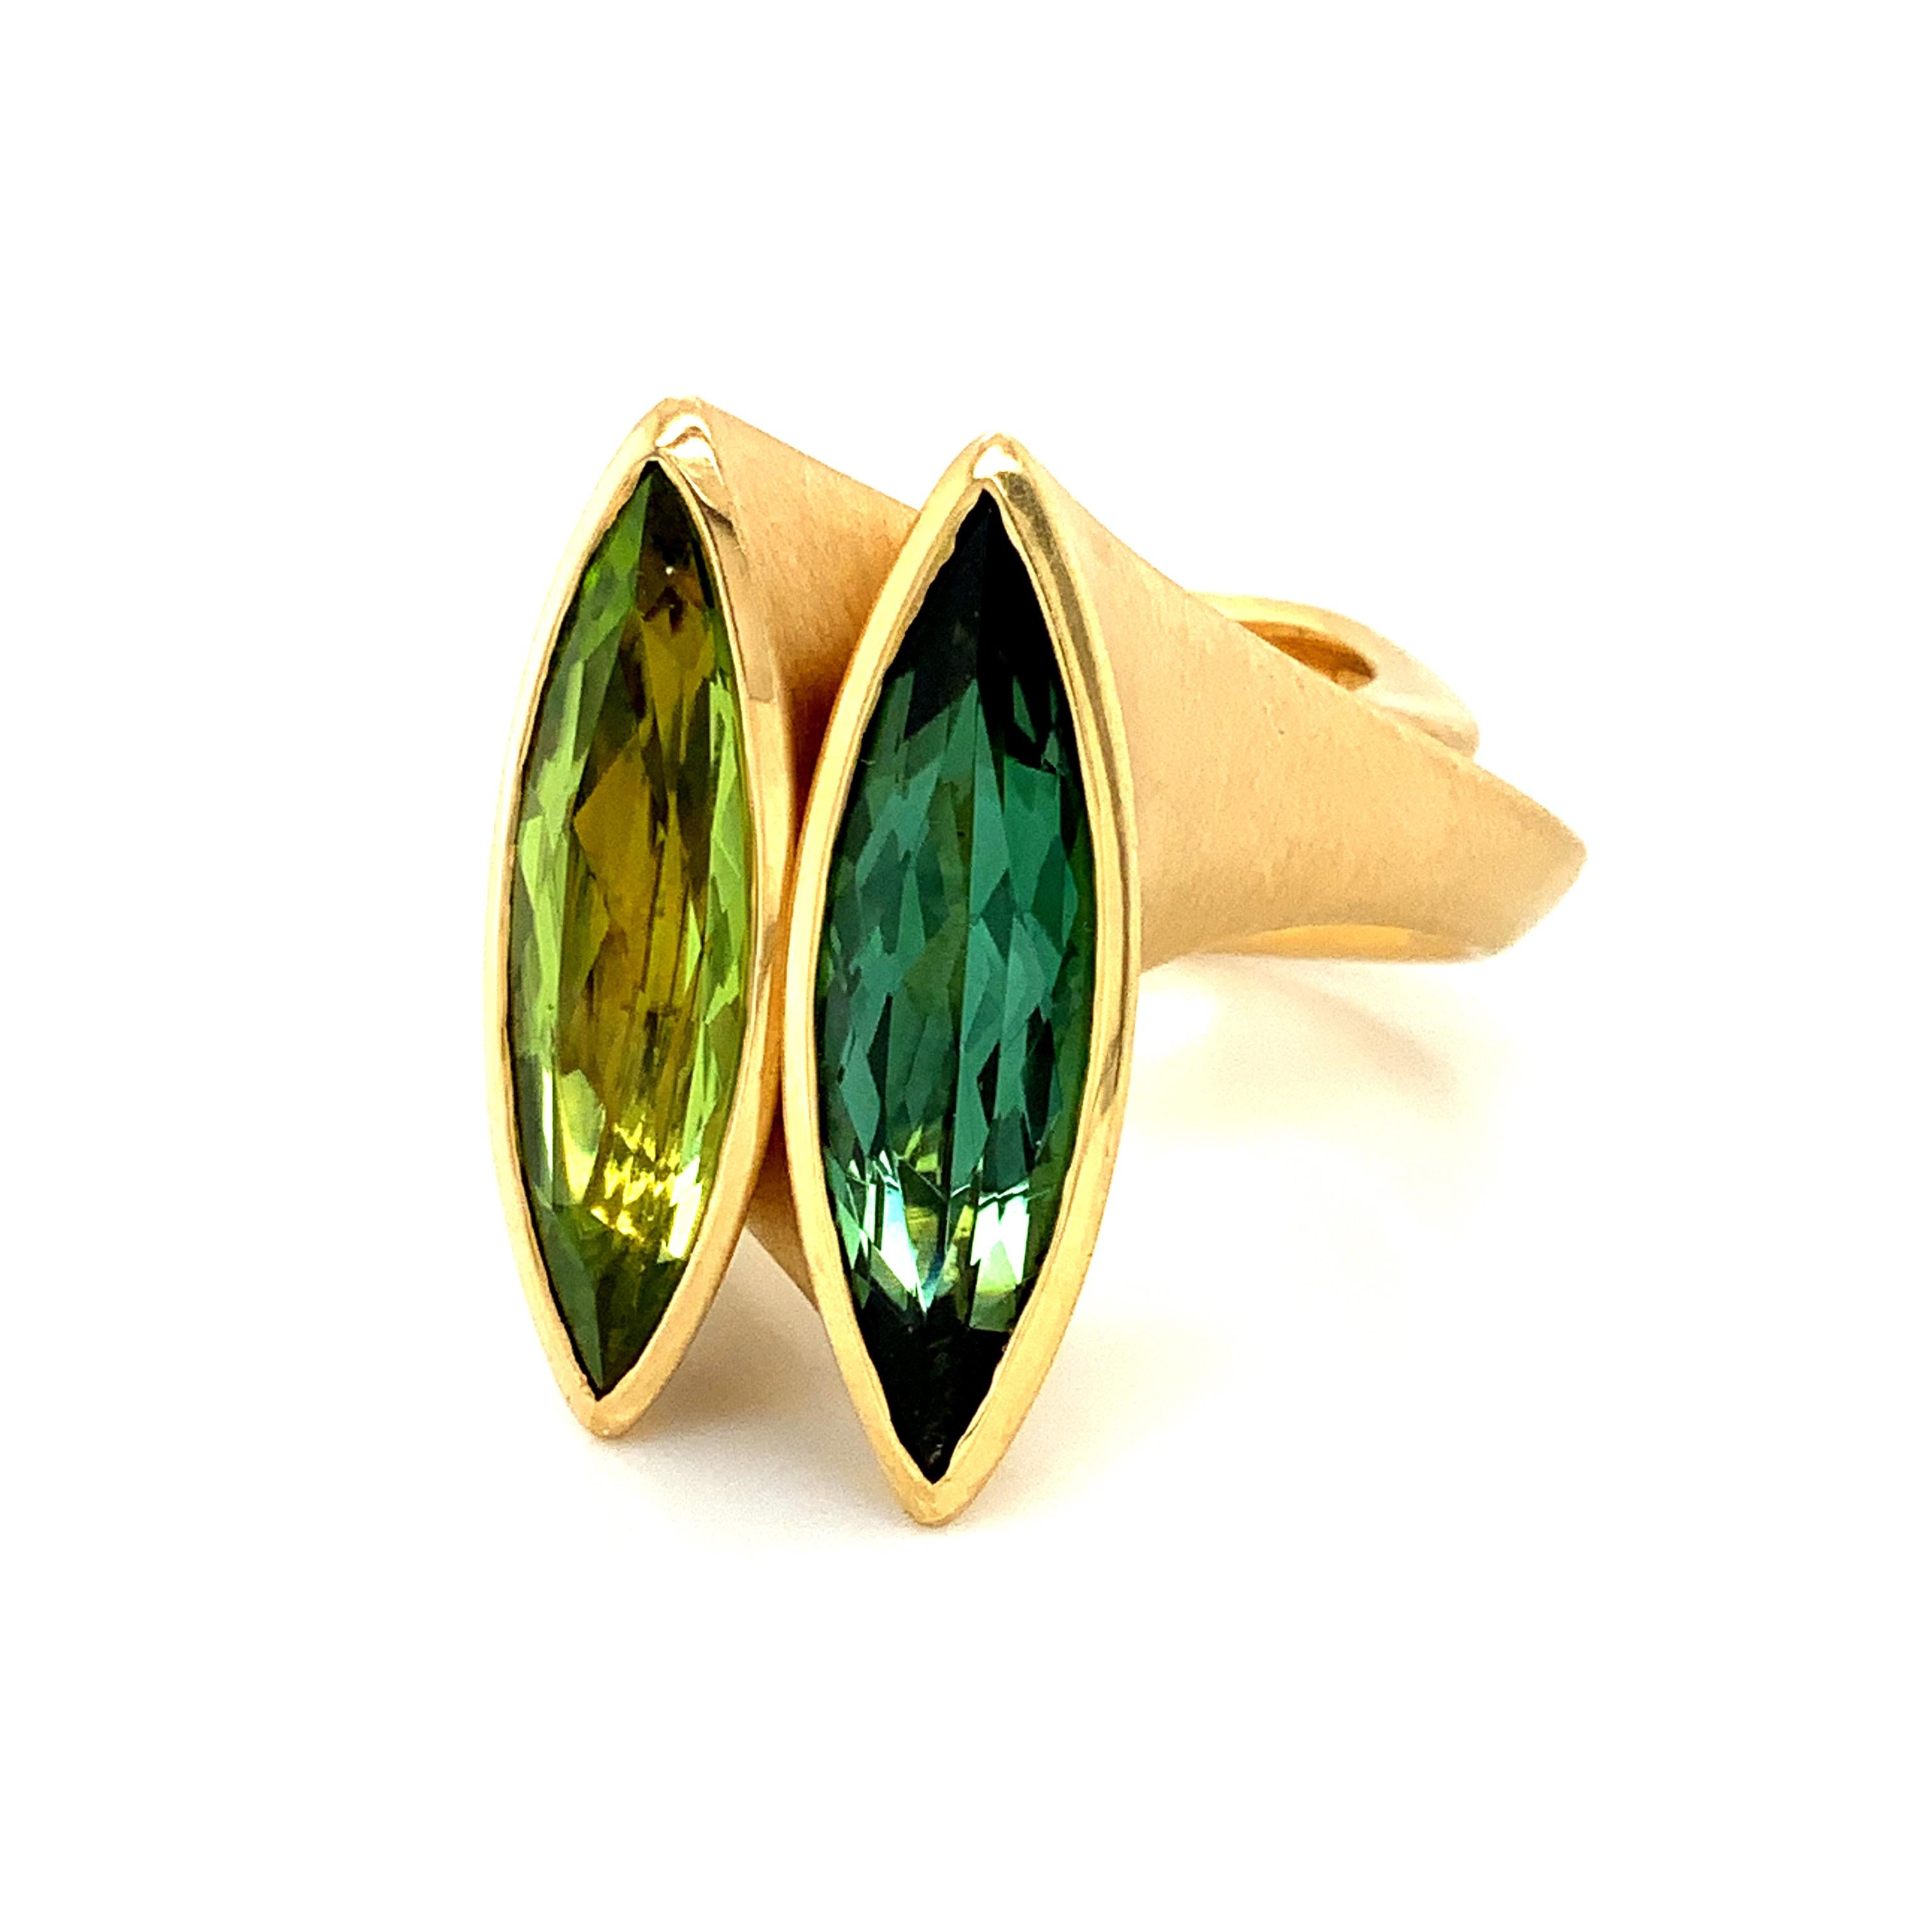  Georg Spreng - Twist Ring 18 Karat Yellow Gold with Green Tourmaline Marquise For Sale 2